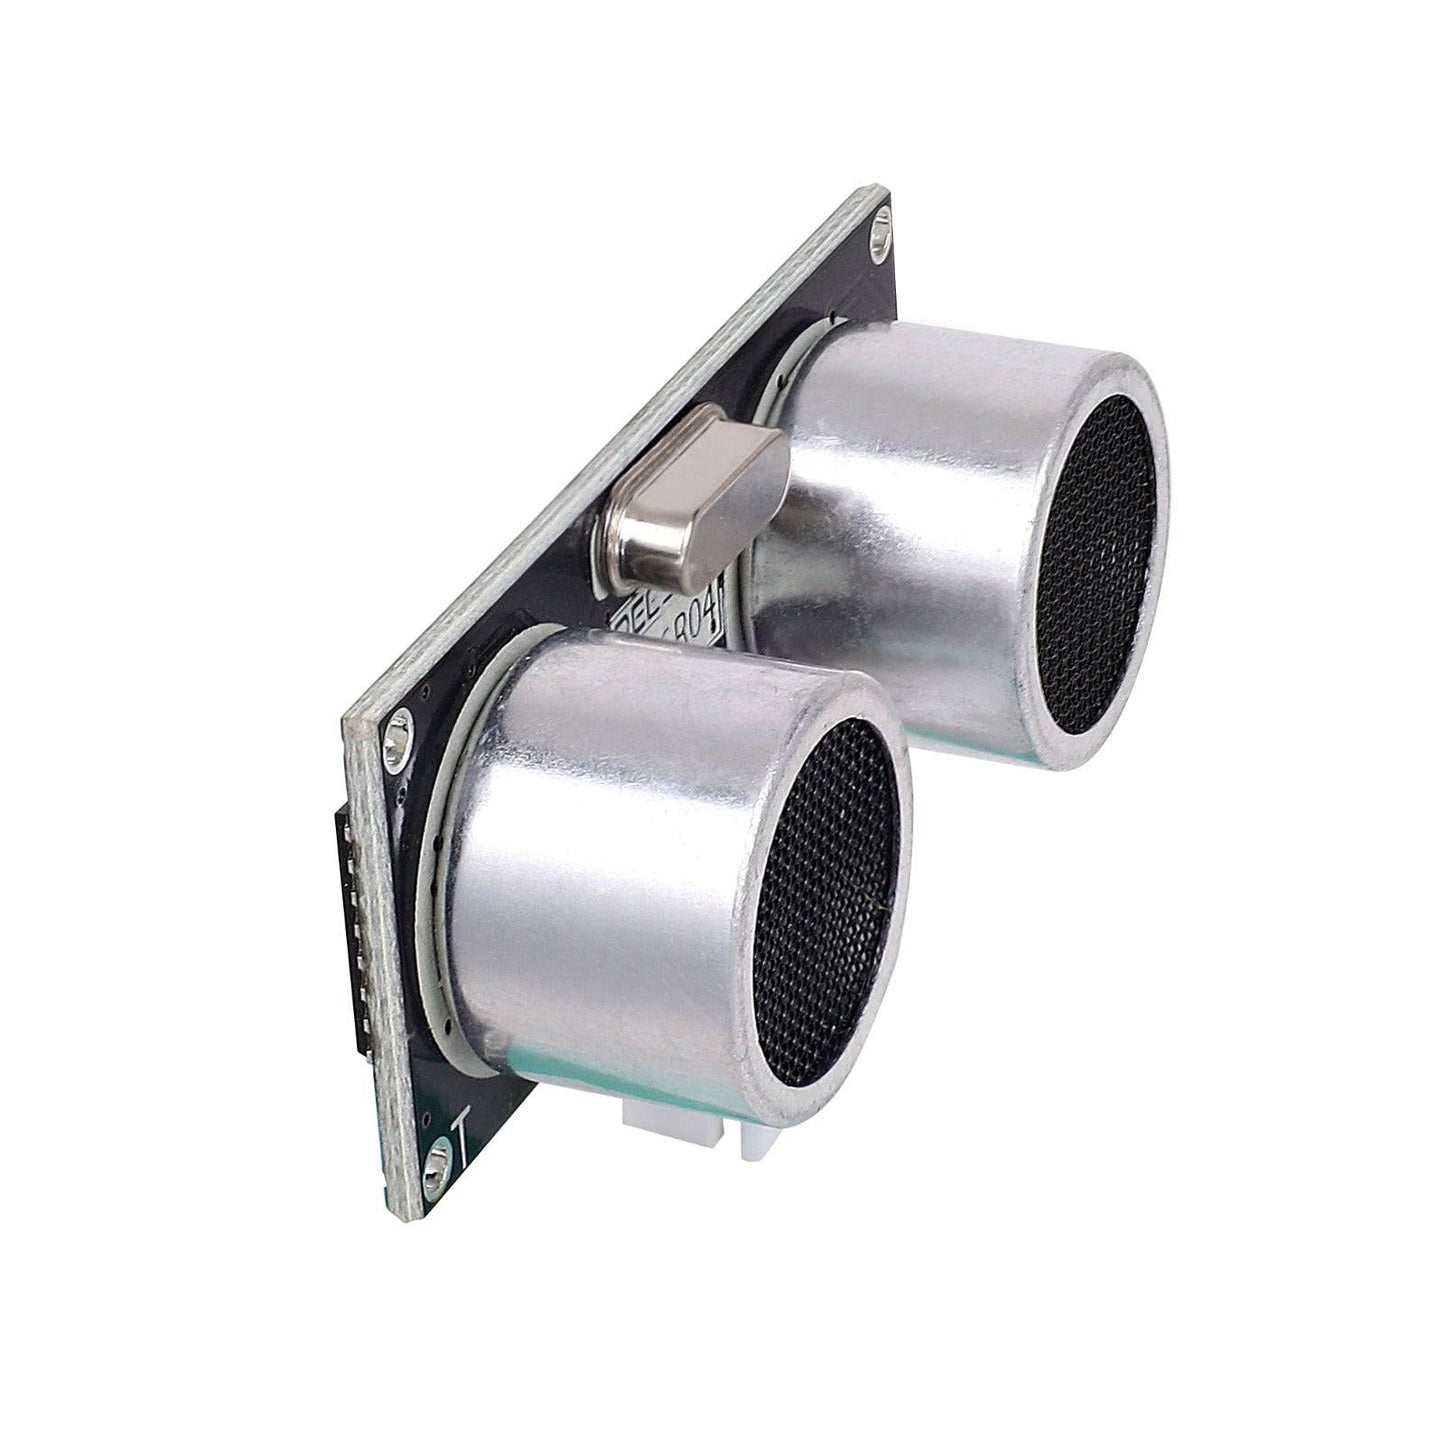 REES52 Ultrasonic Sensor with 4-Pin JST Connector